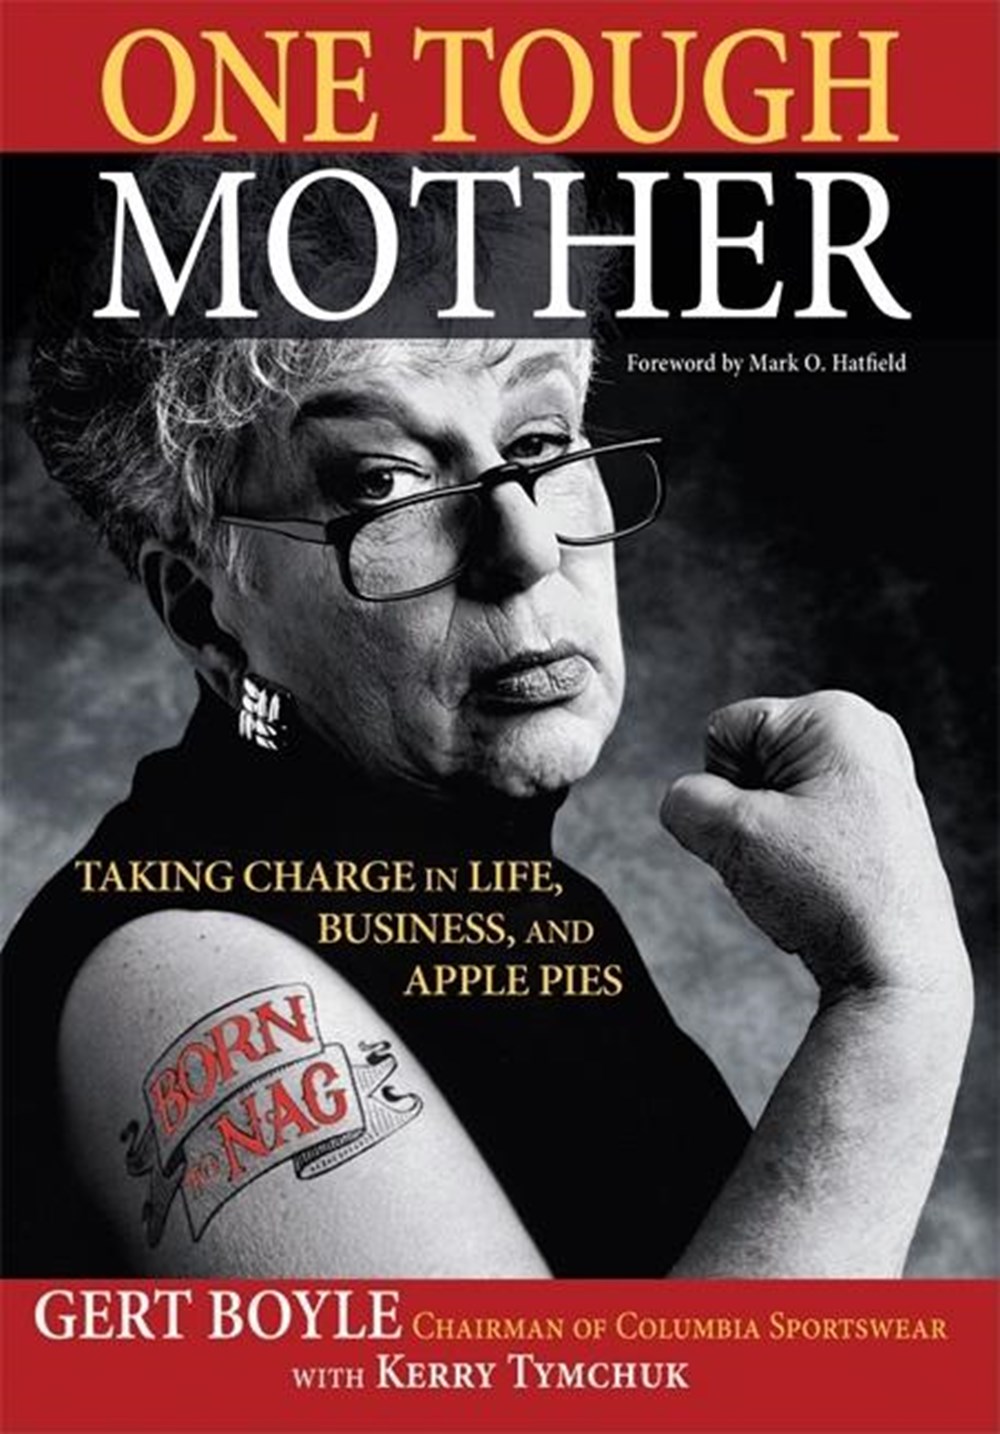 One Tough Mother: Taking Charge in Life, Business, and Apple Pies